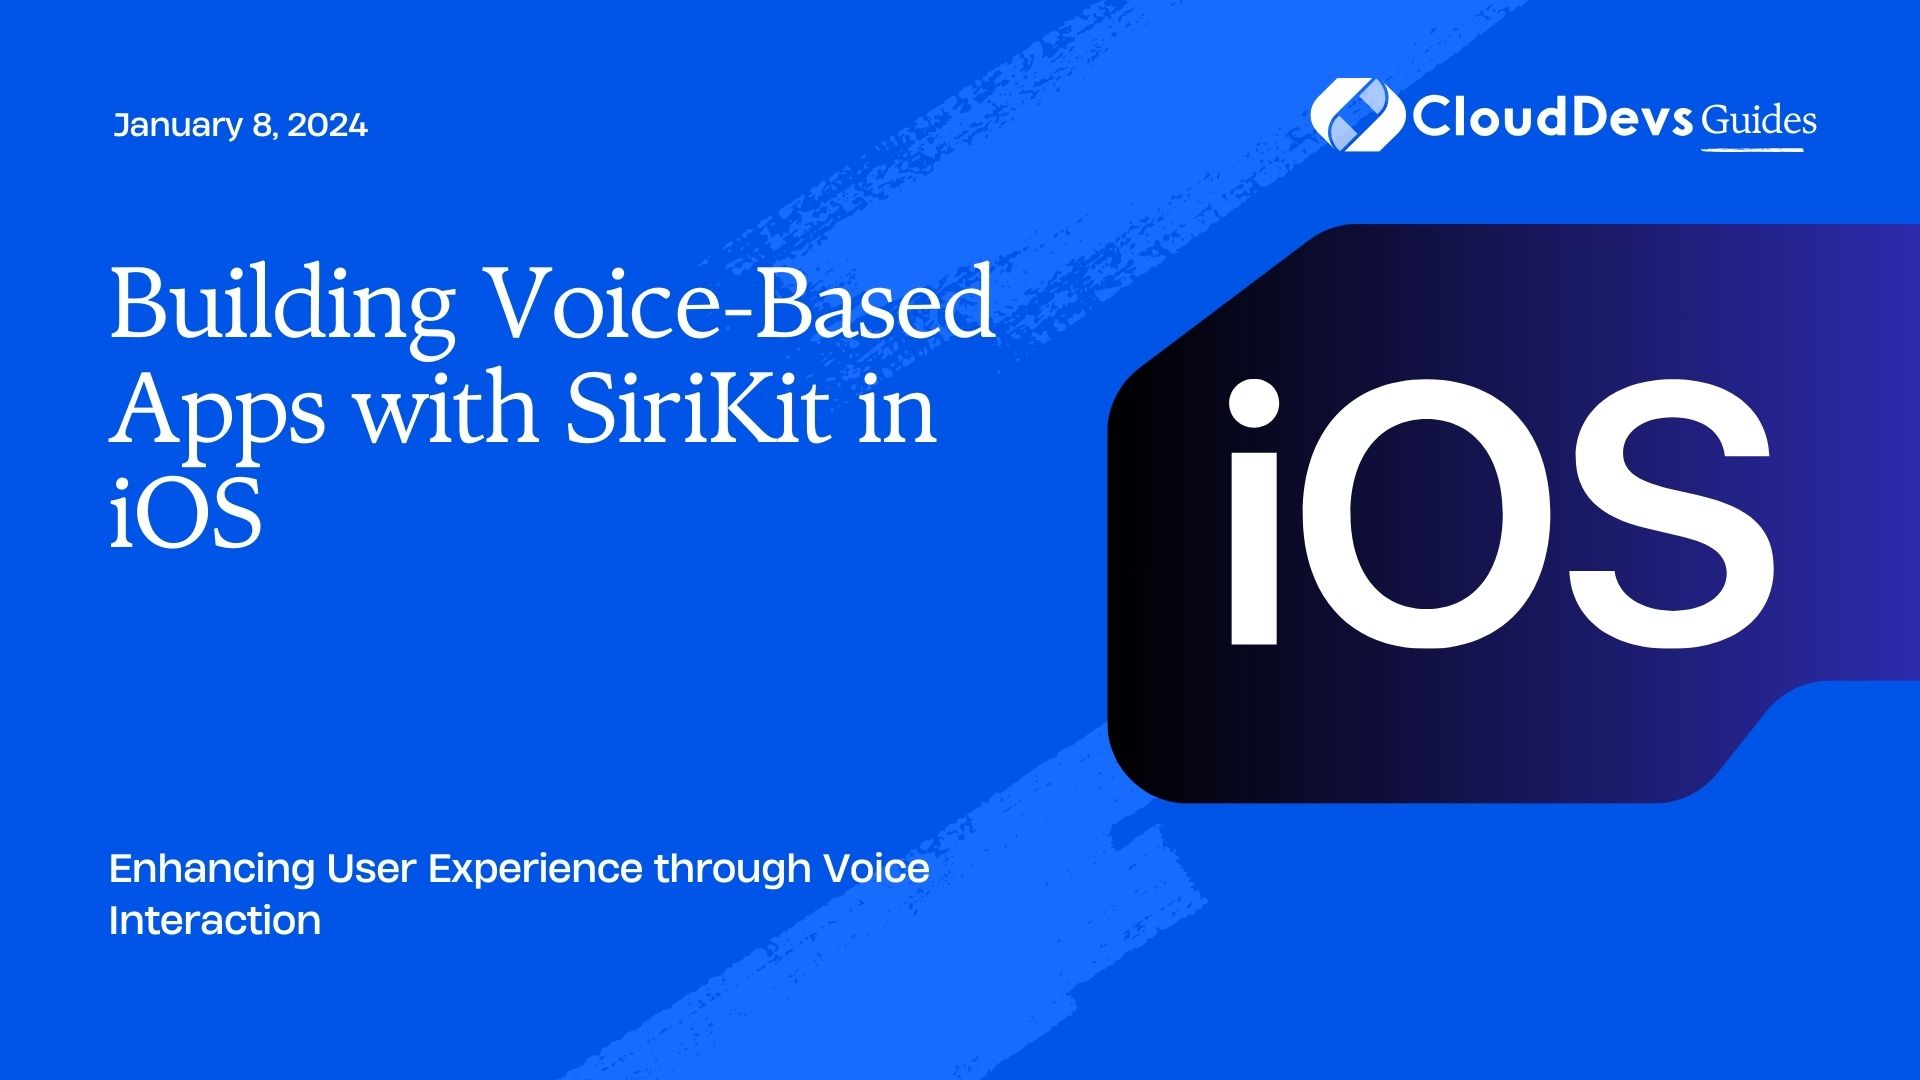 Building Voice-Based Apps with SiriKit in iOS